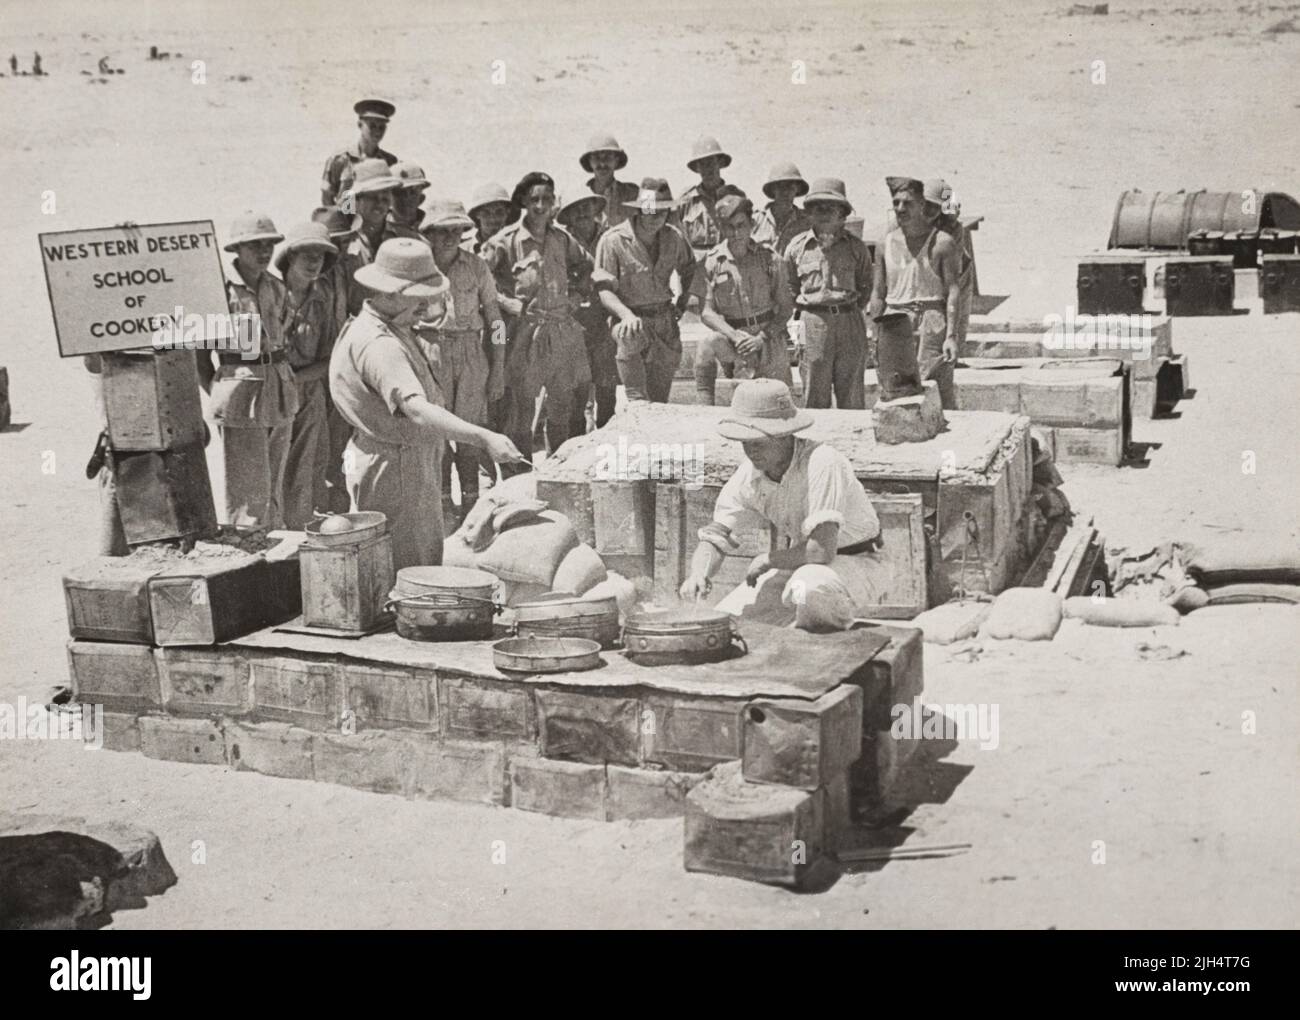 British and Australian soldiers being trained to prepare food on wood fired cooking stoves at the Western Desert Cookery School where army cooks were taught improvisation and how to make full use of field rations. The ovens are made out of petrol tins and oil drums. Stock Photo